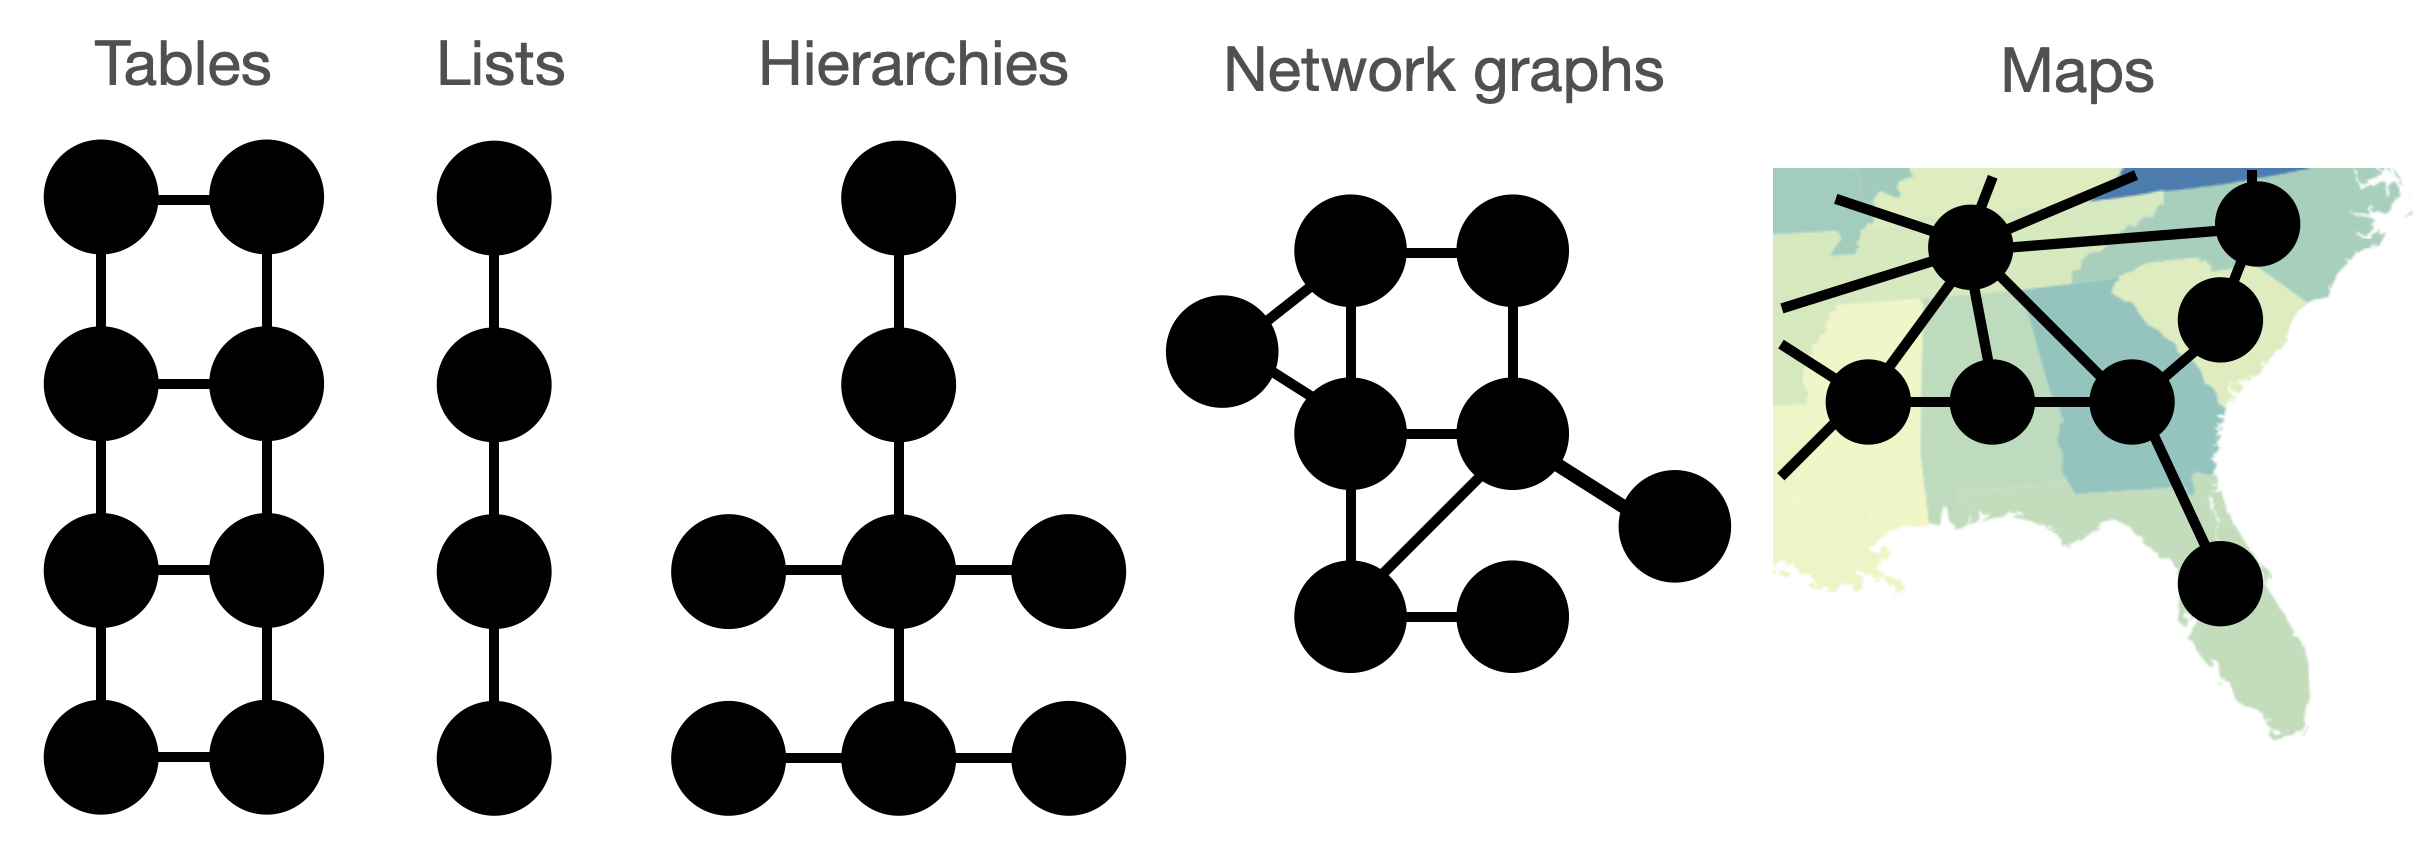 Nodes and edges arranged to take the shape of tabular data, a list, a hierarchy, a network graph, and overlaid on a map.